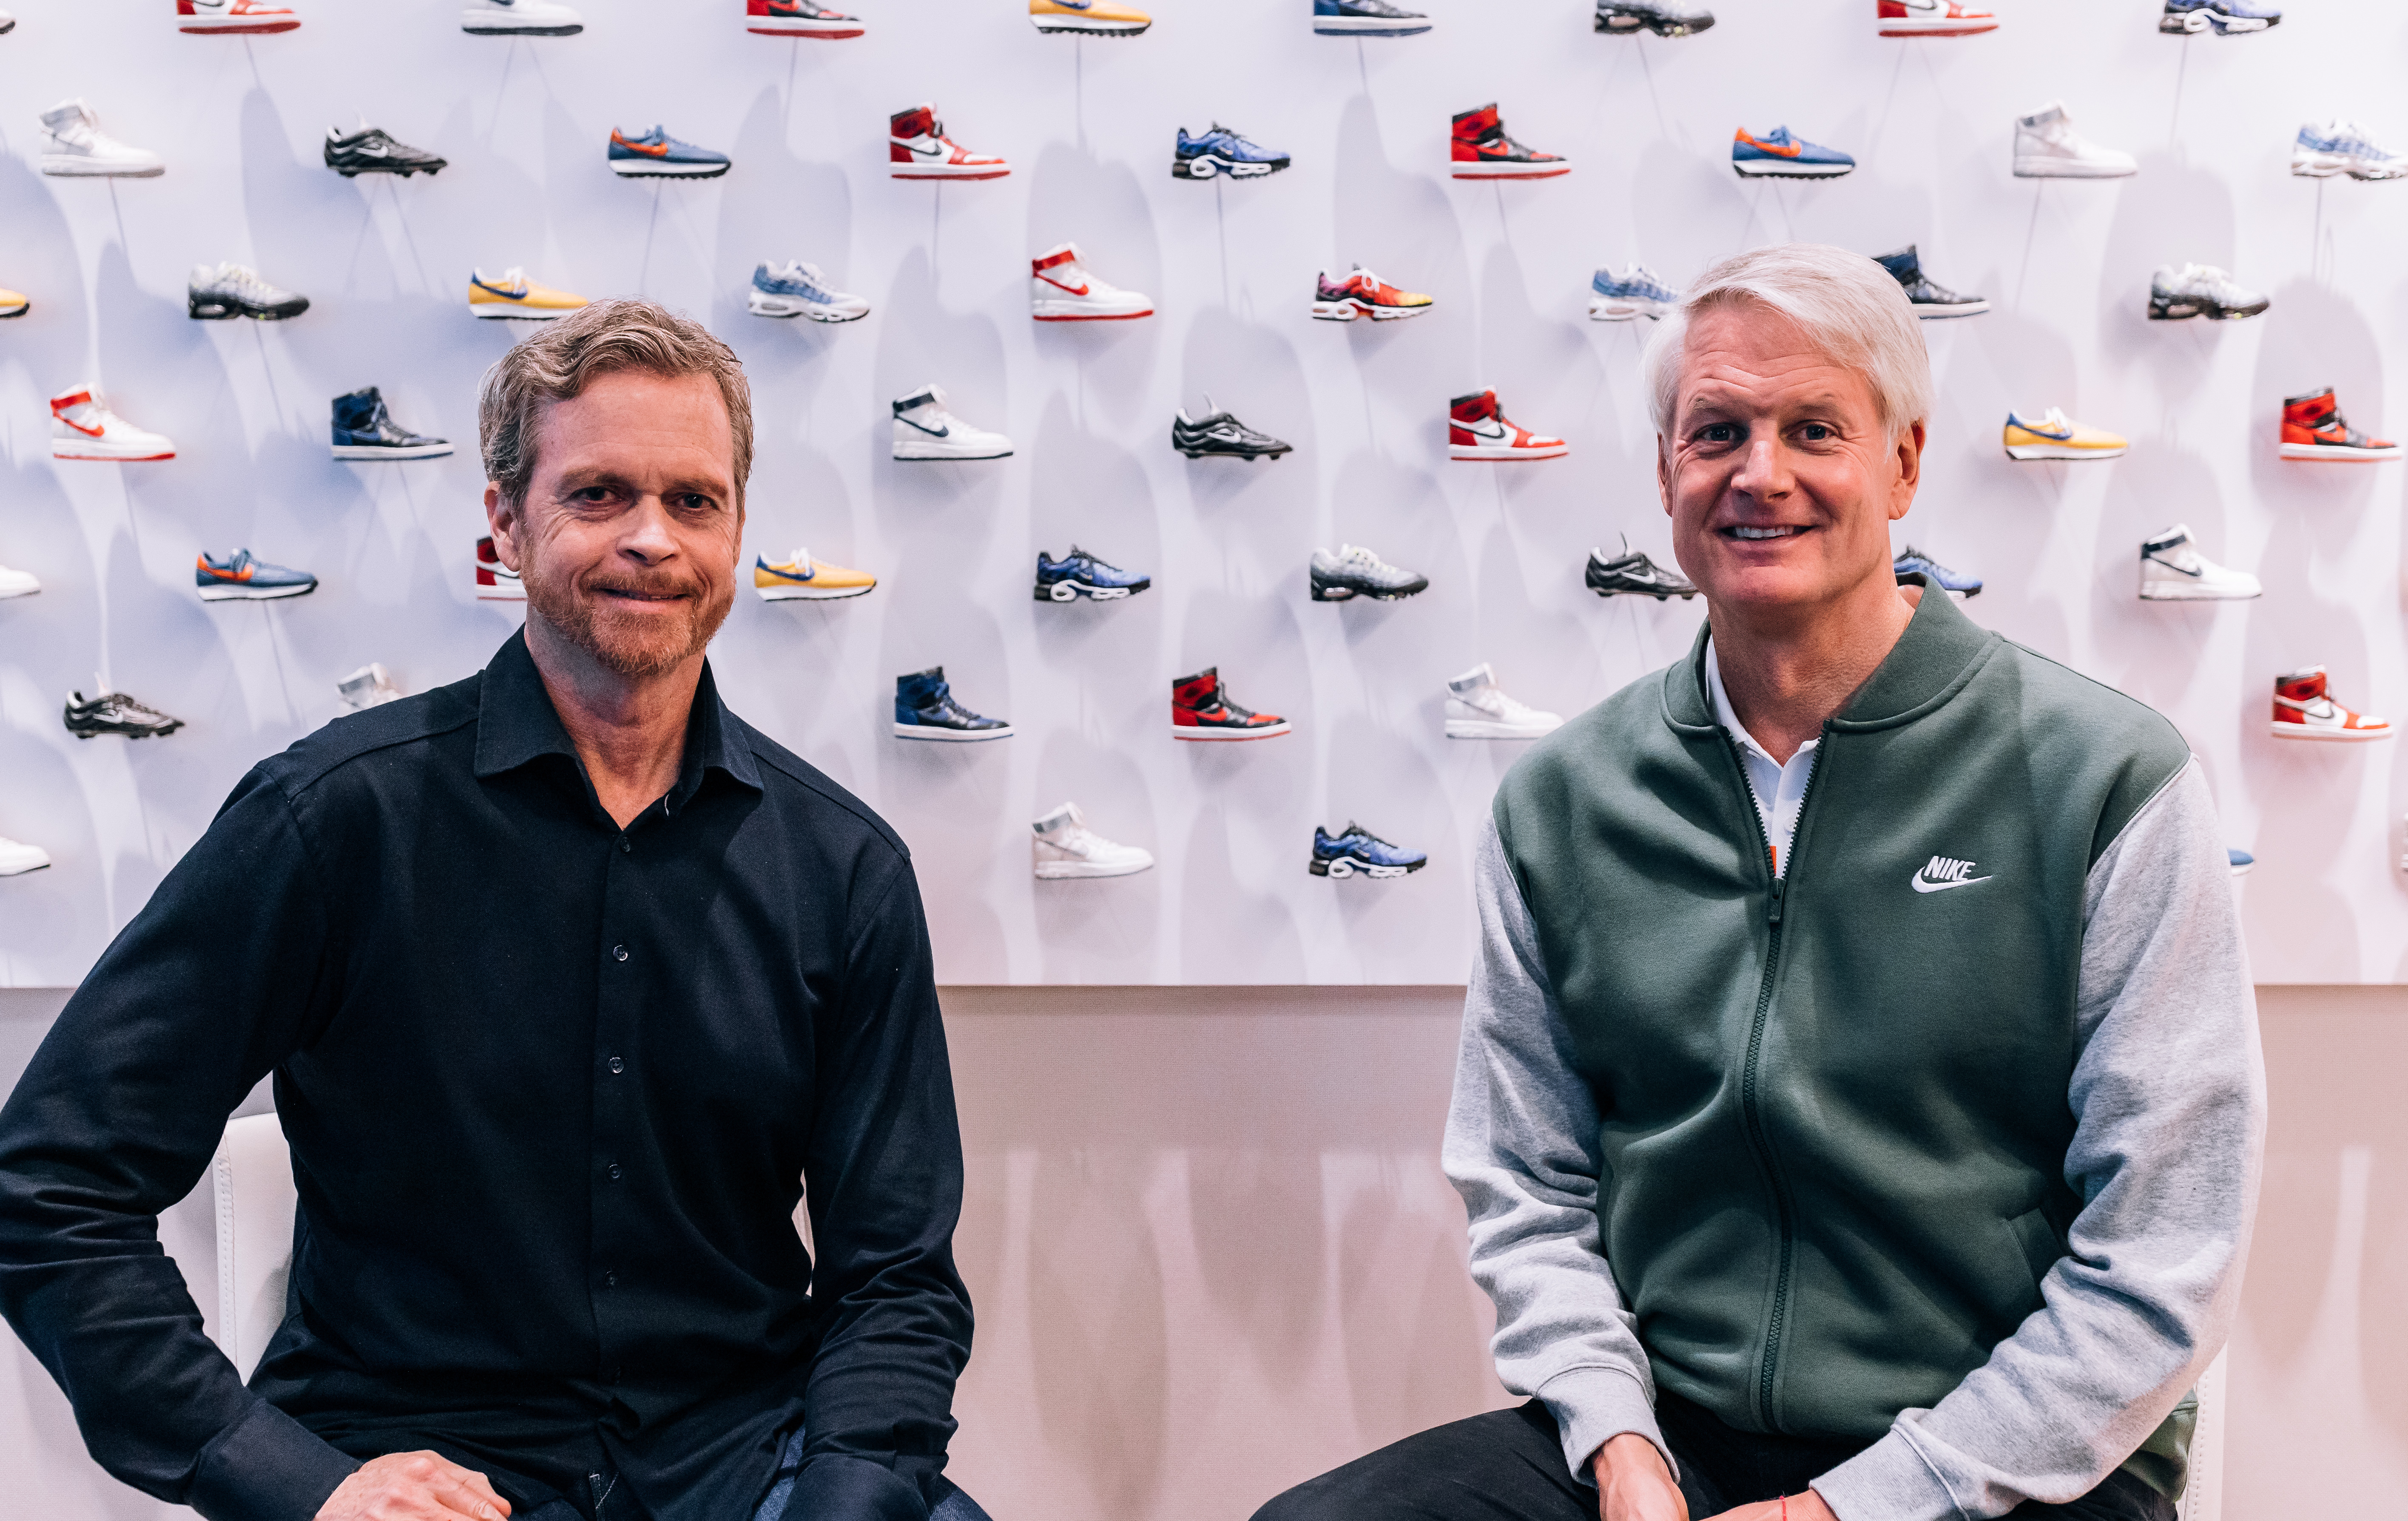 NIKE, Inc. Announces Board Member John Donahoe Will Succeed Mark Parker President & CEO in 2020; Parker to Become Executive Chairman | Business Wire